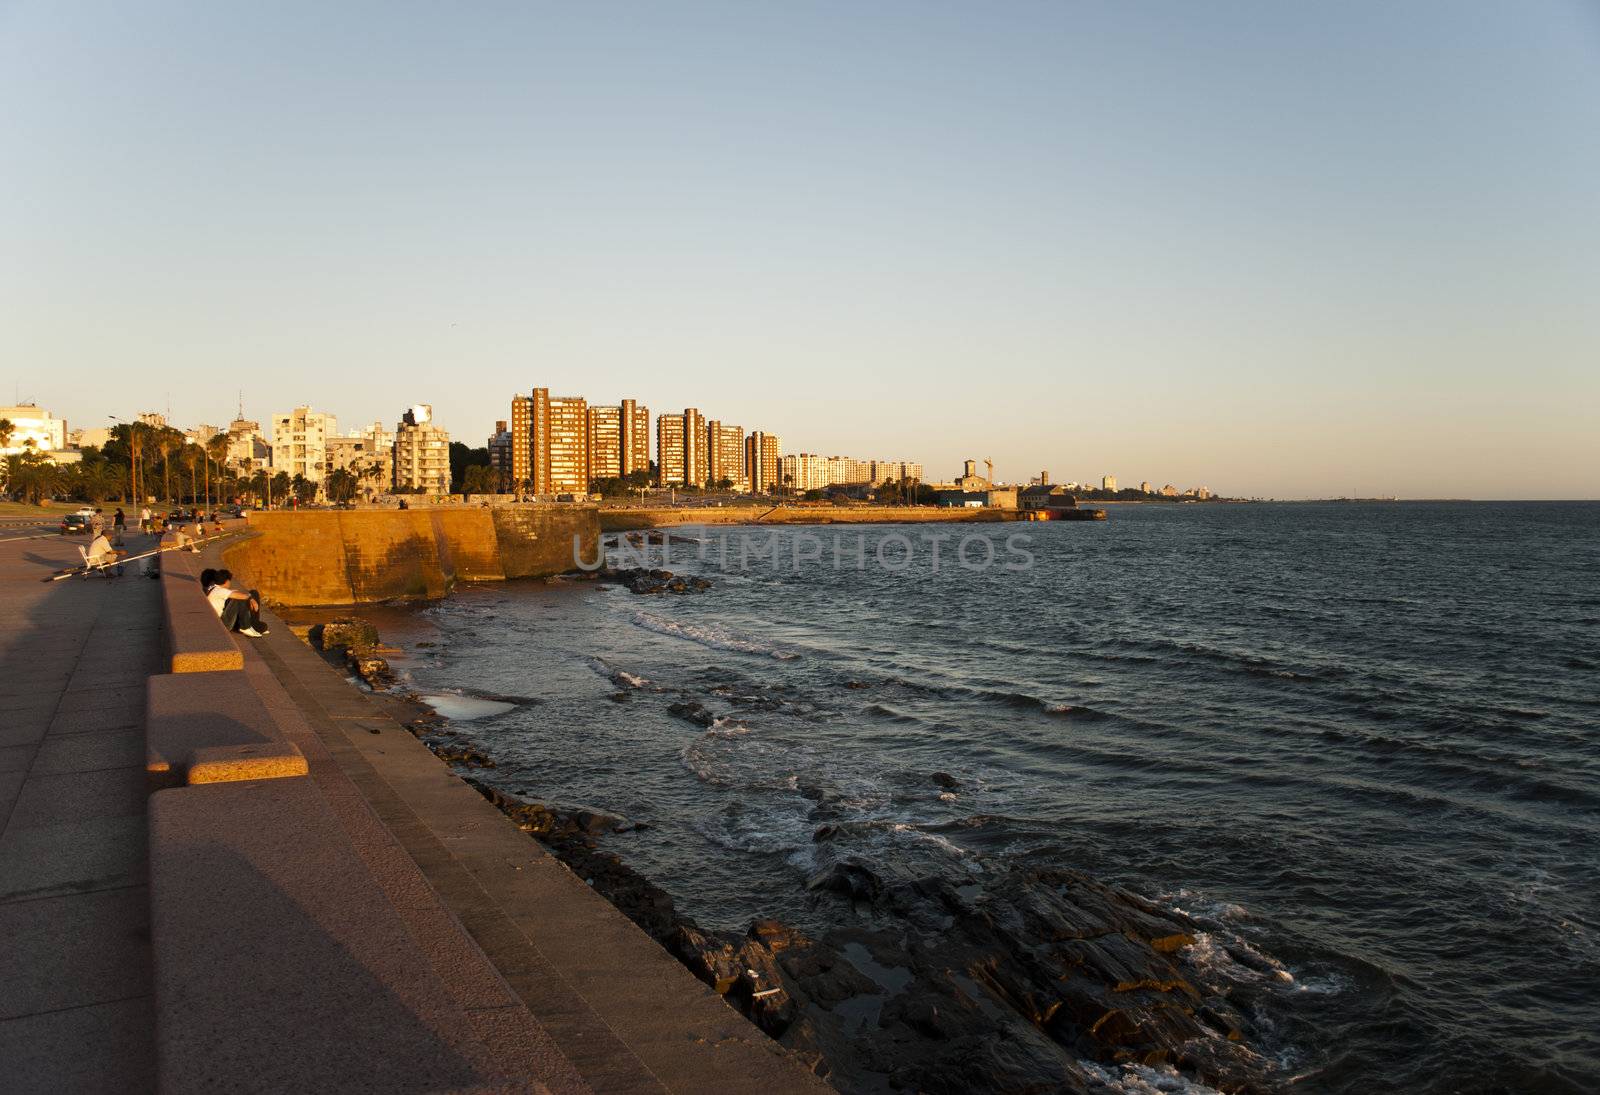 City of Montevideo, Uruguay by lauria